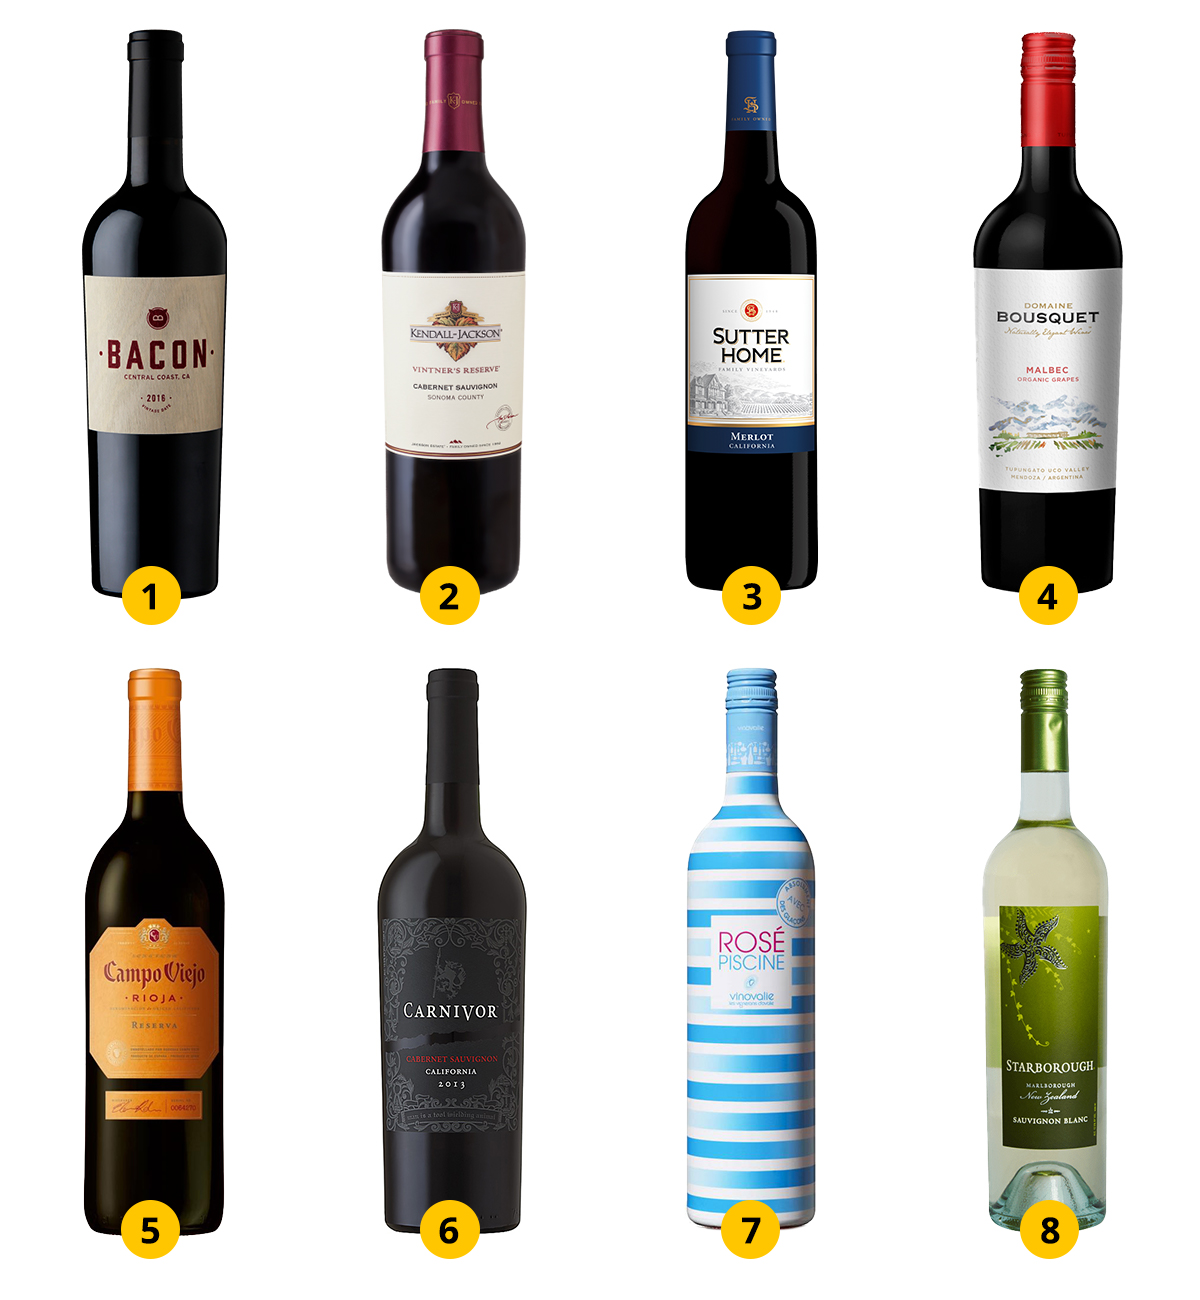 Top wines for grilling in your market.